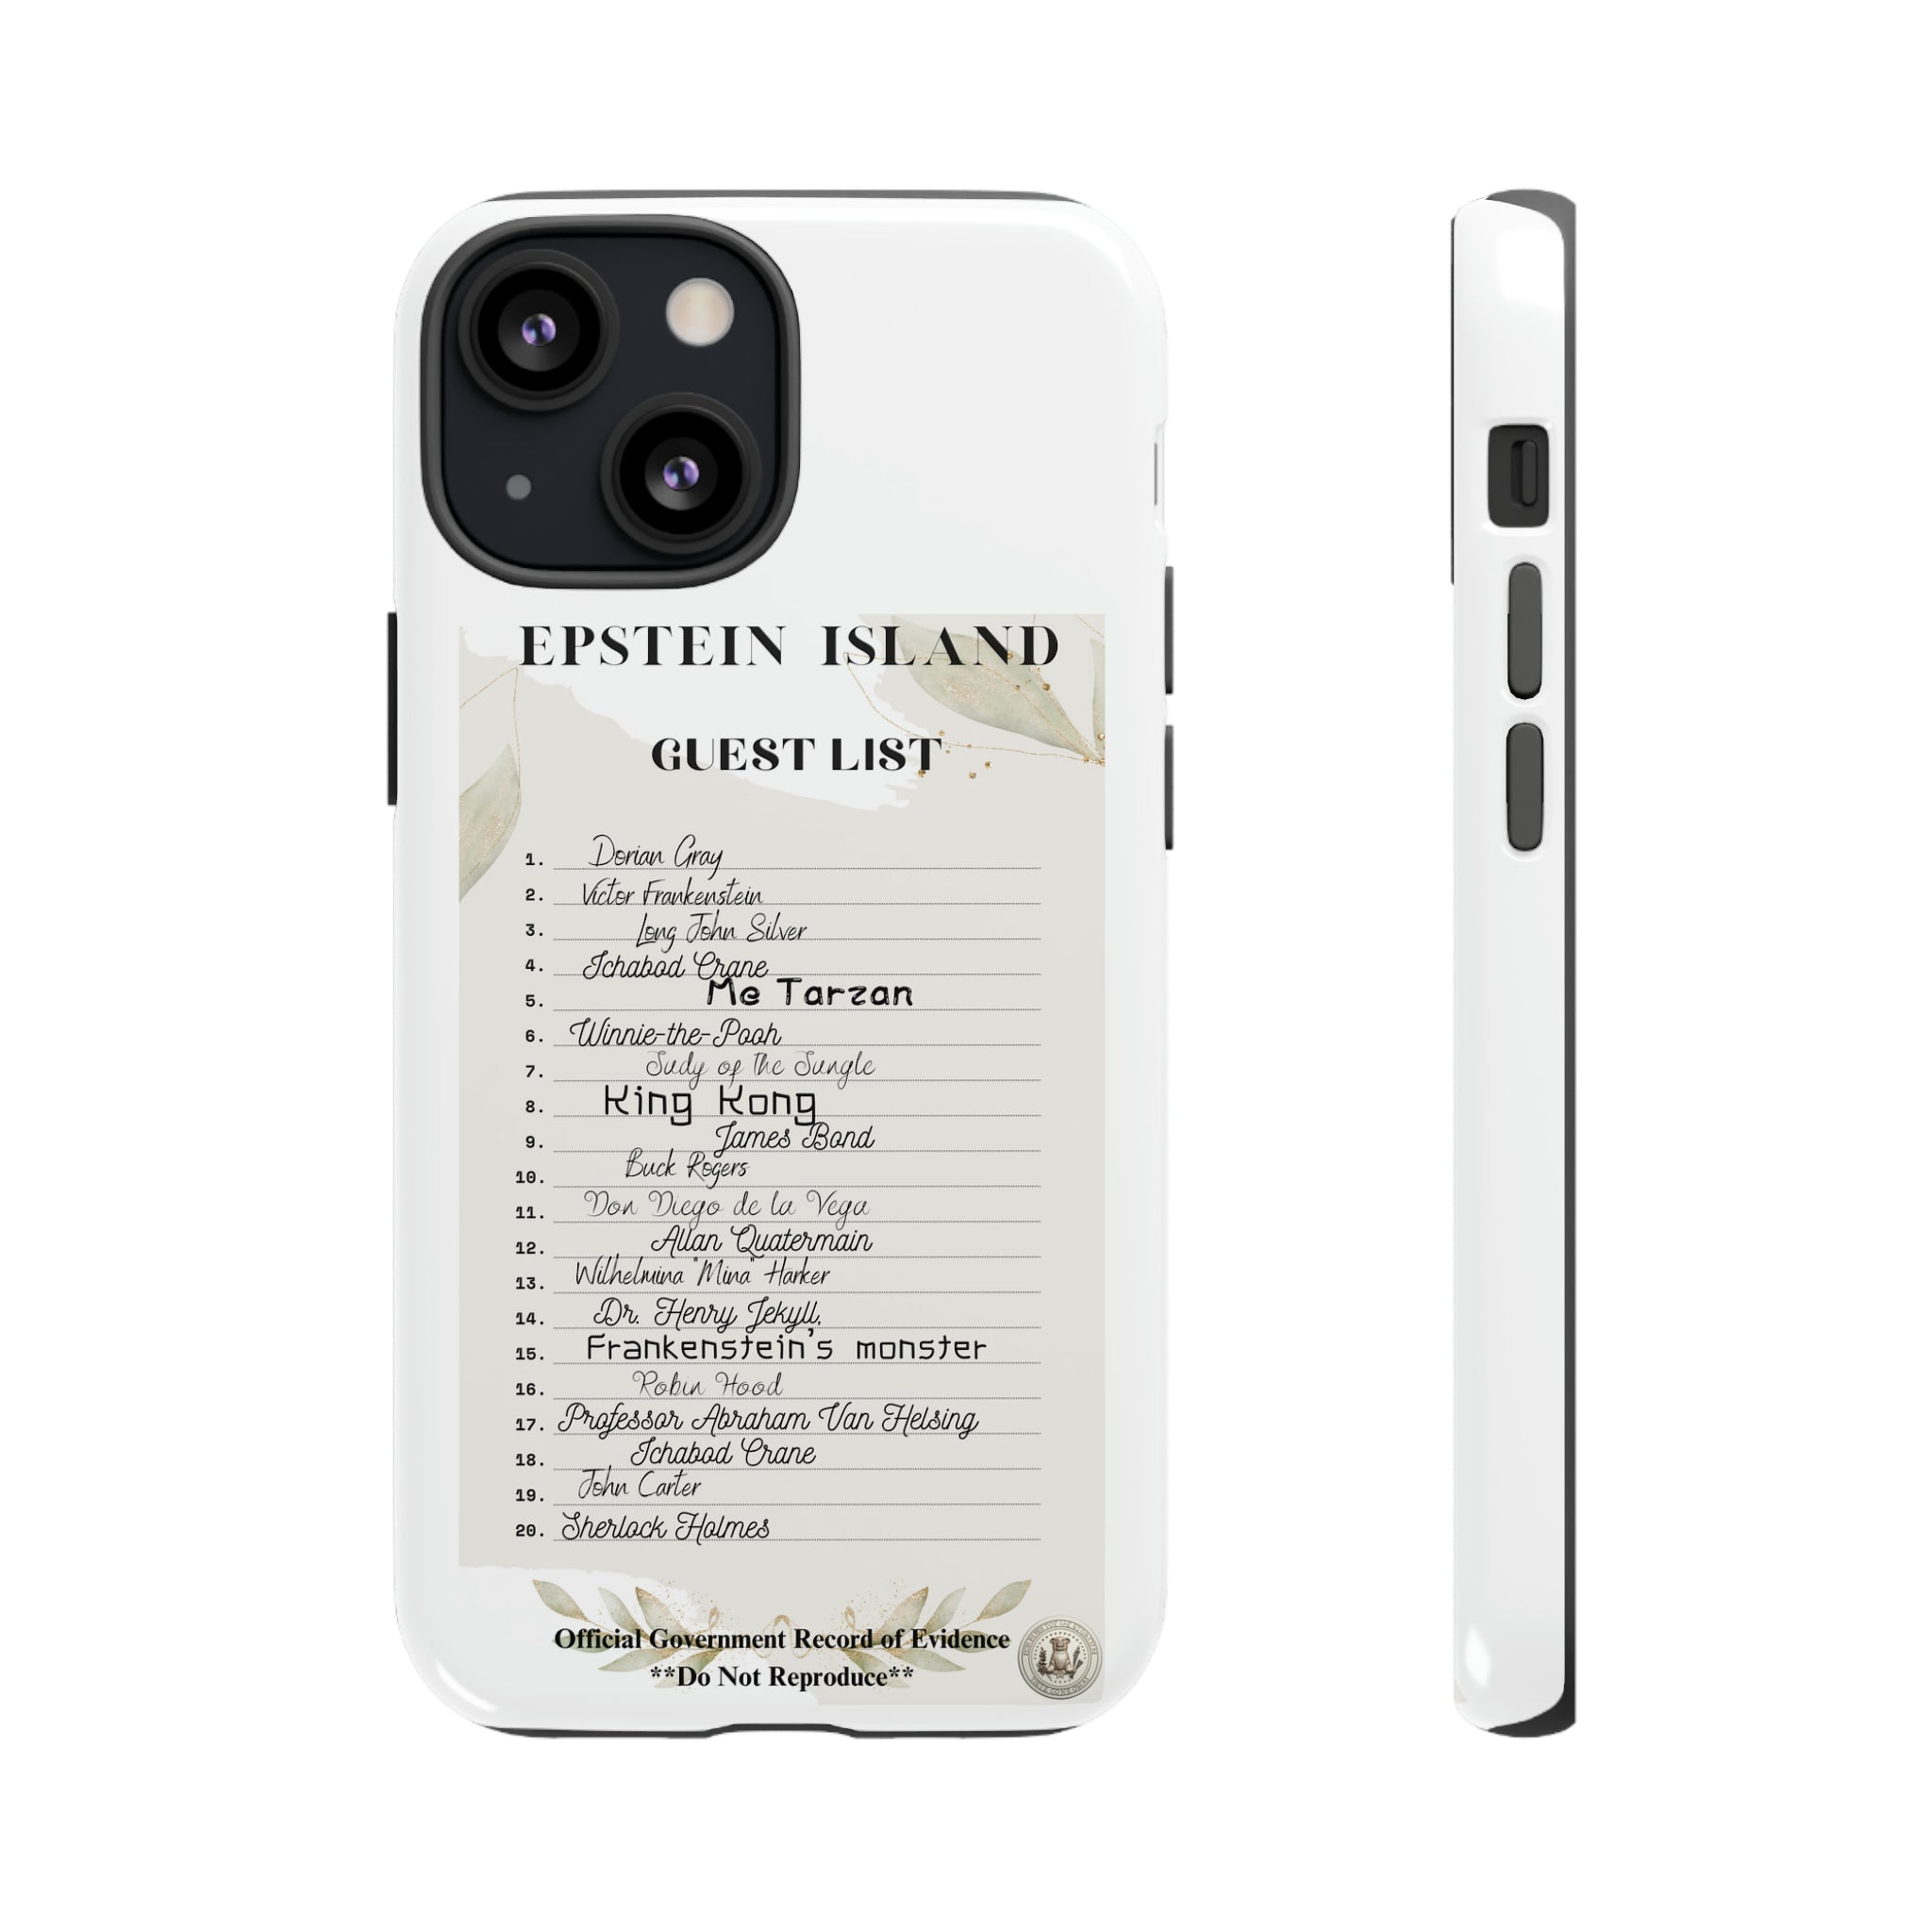 "Mystery Island Survivor" Phone Tough Case Gift for Conspiracy Theorists and Truth Seekers Gift that Will Start a Conversation and Break the Ice for Introverts